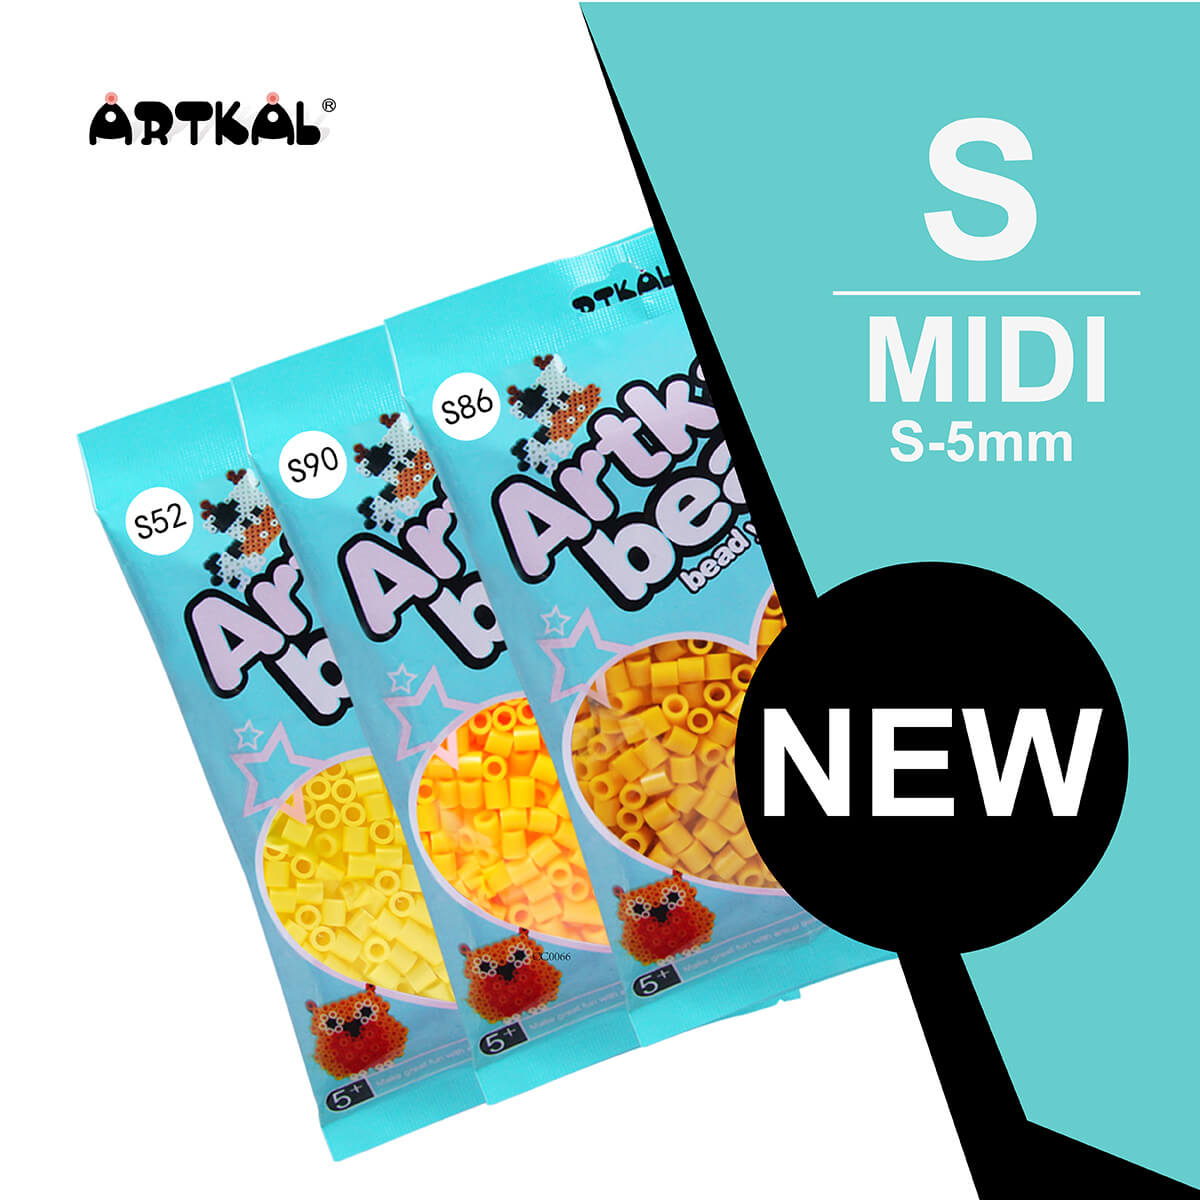 Artkal 72 bags MIDI Hama Beads S-5mm NEW Colors Set 1000 Count Pack –  Official Artkal Store